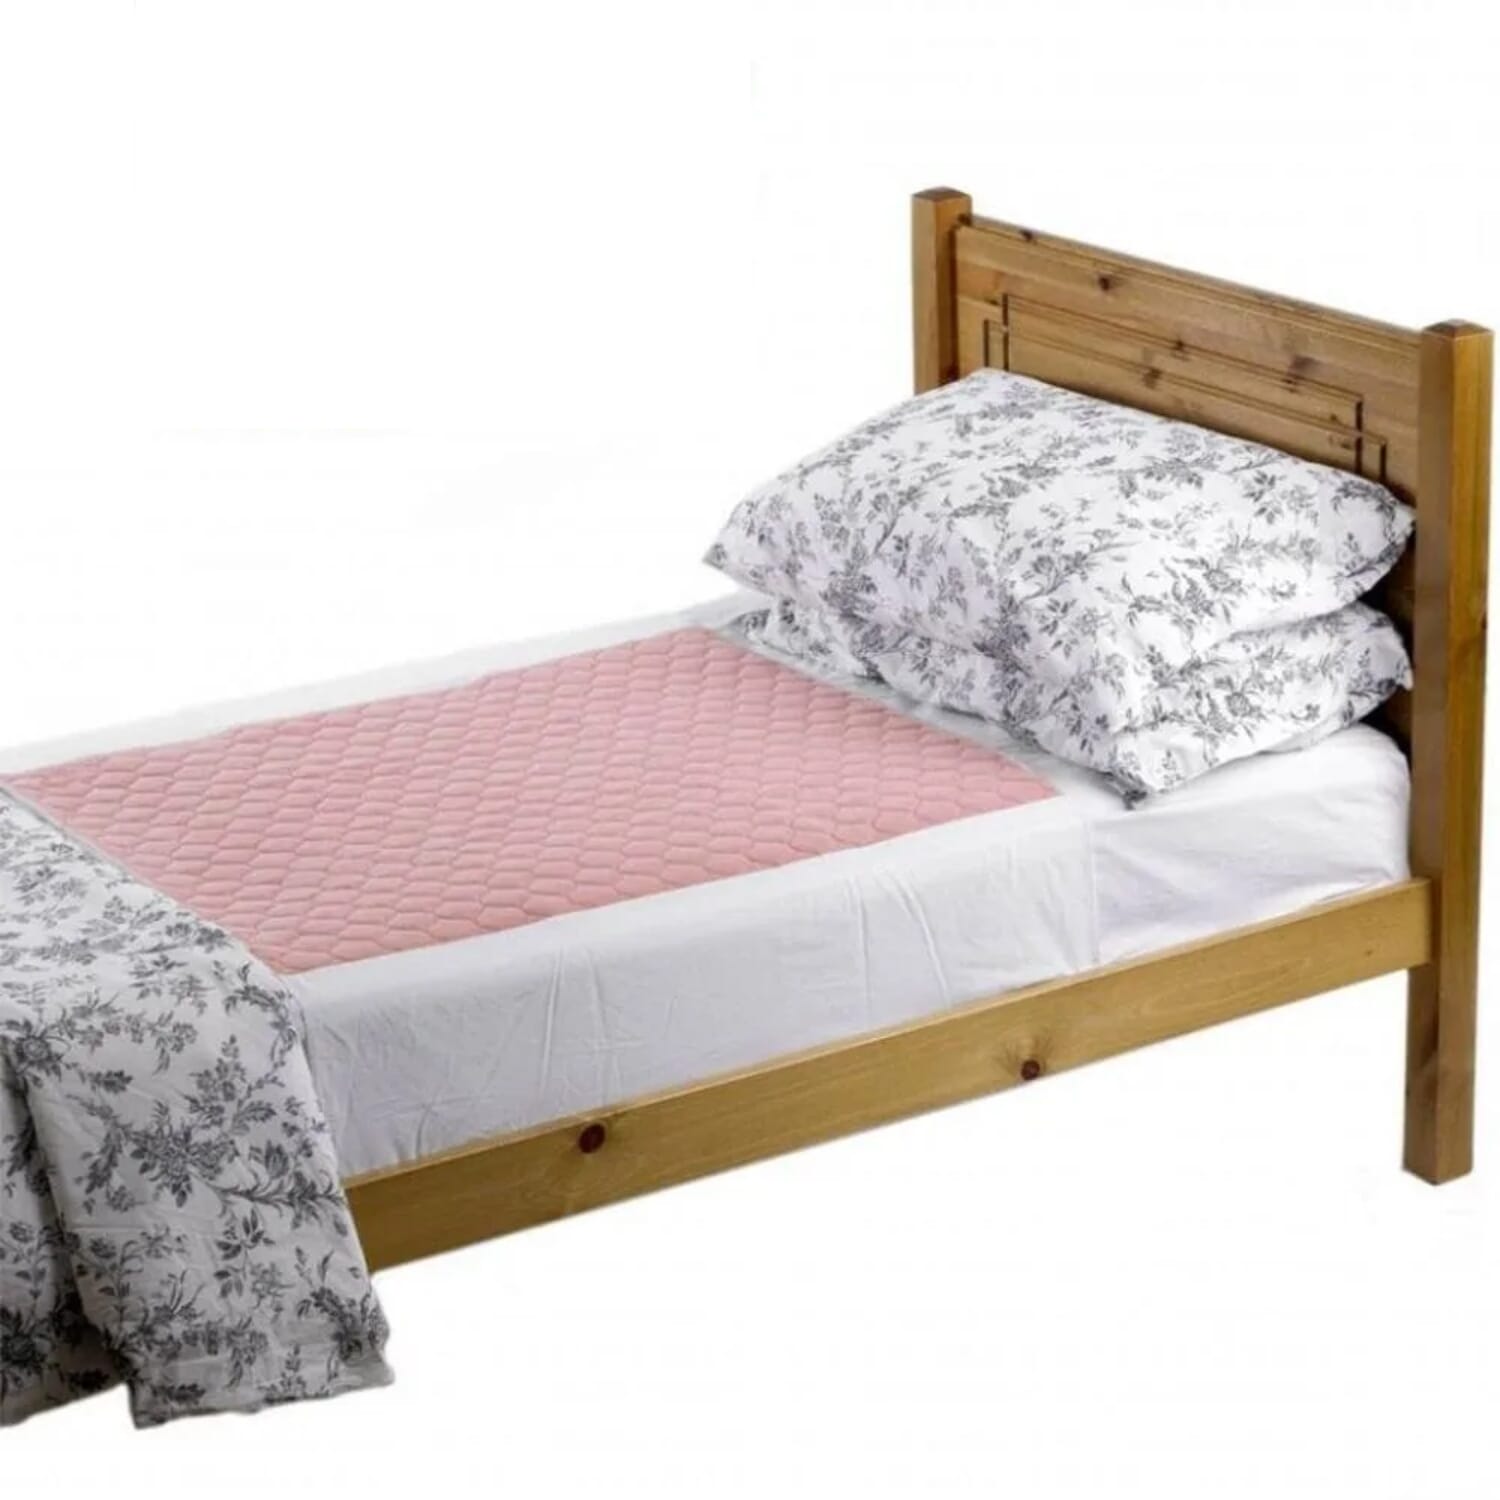 View Kylie Bed Pad 91 x 74cm 2 Litres Pink information